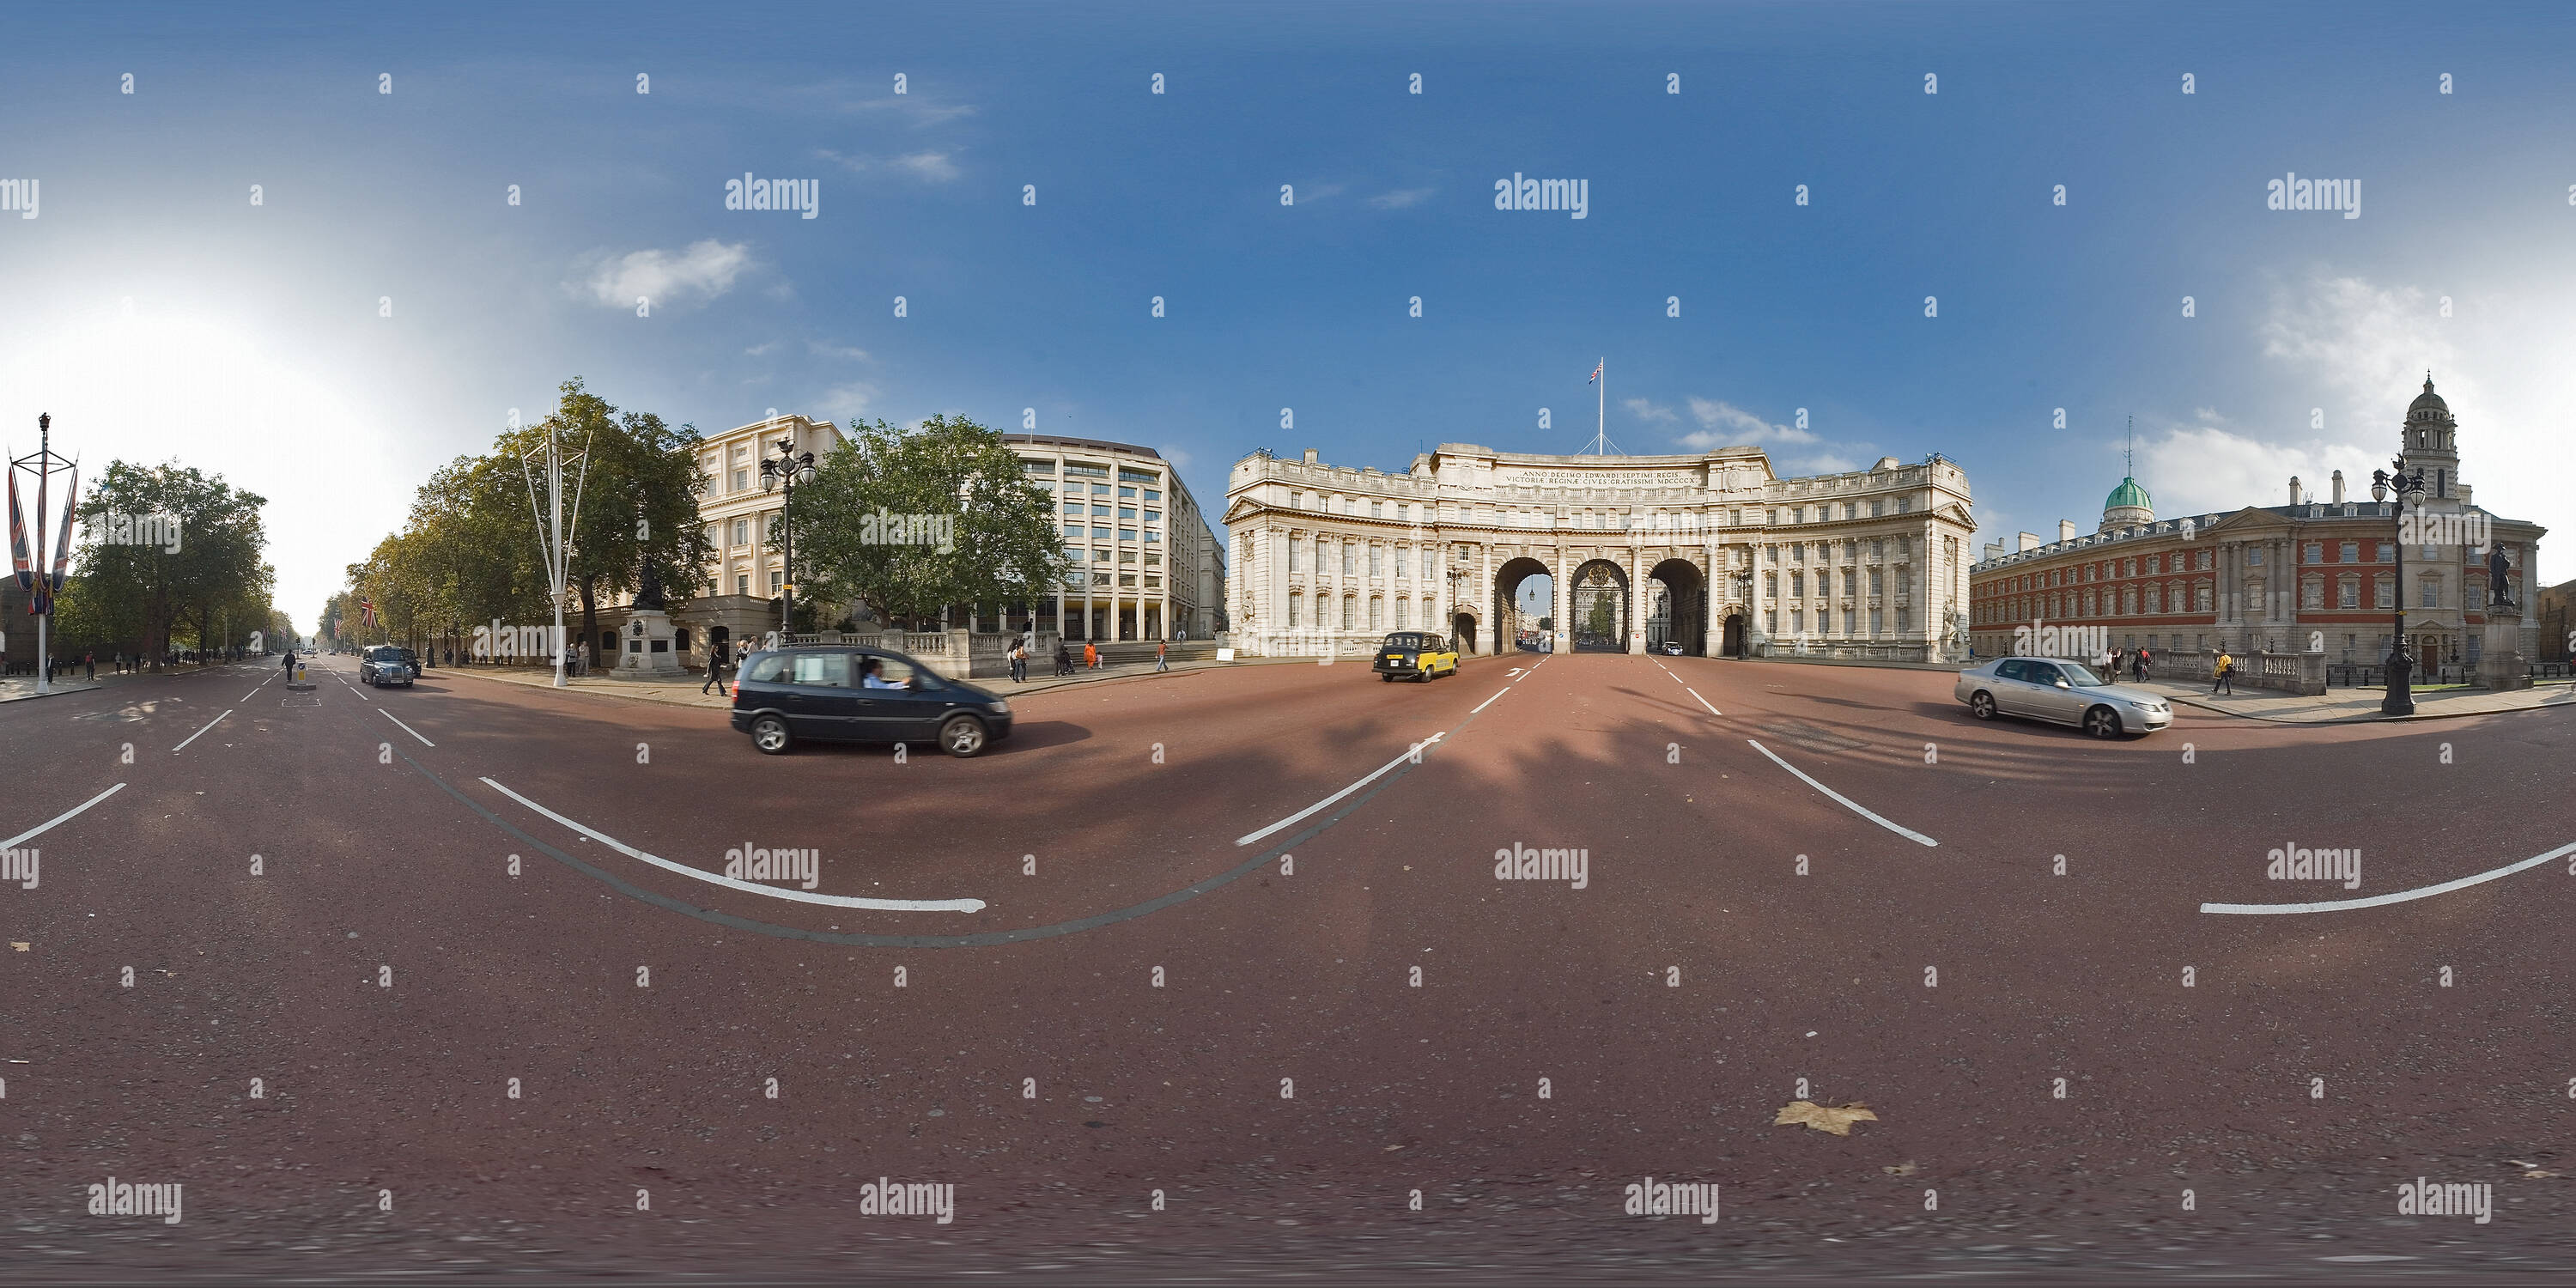 360 degree panoramic view of London The Mall